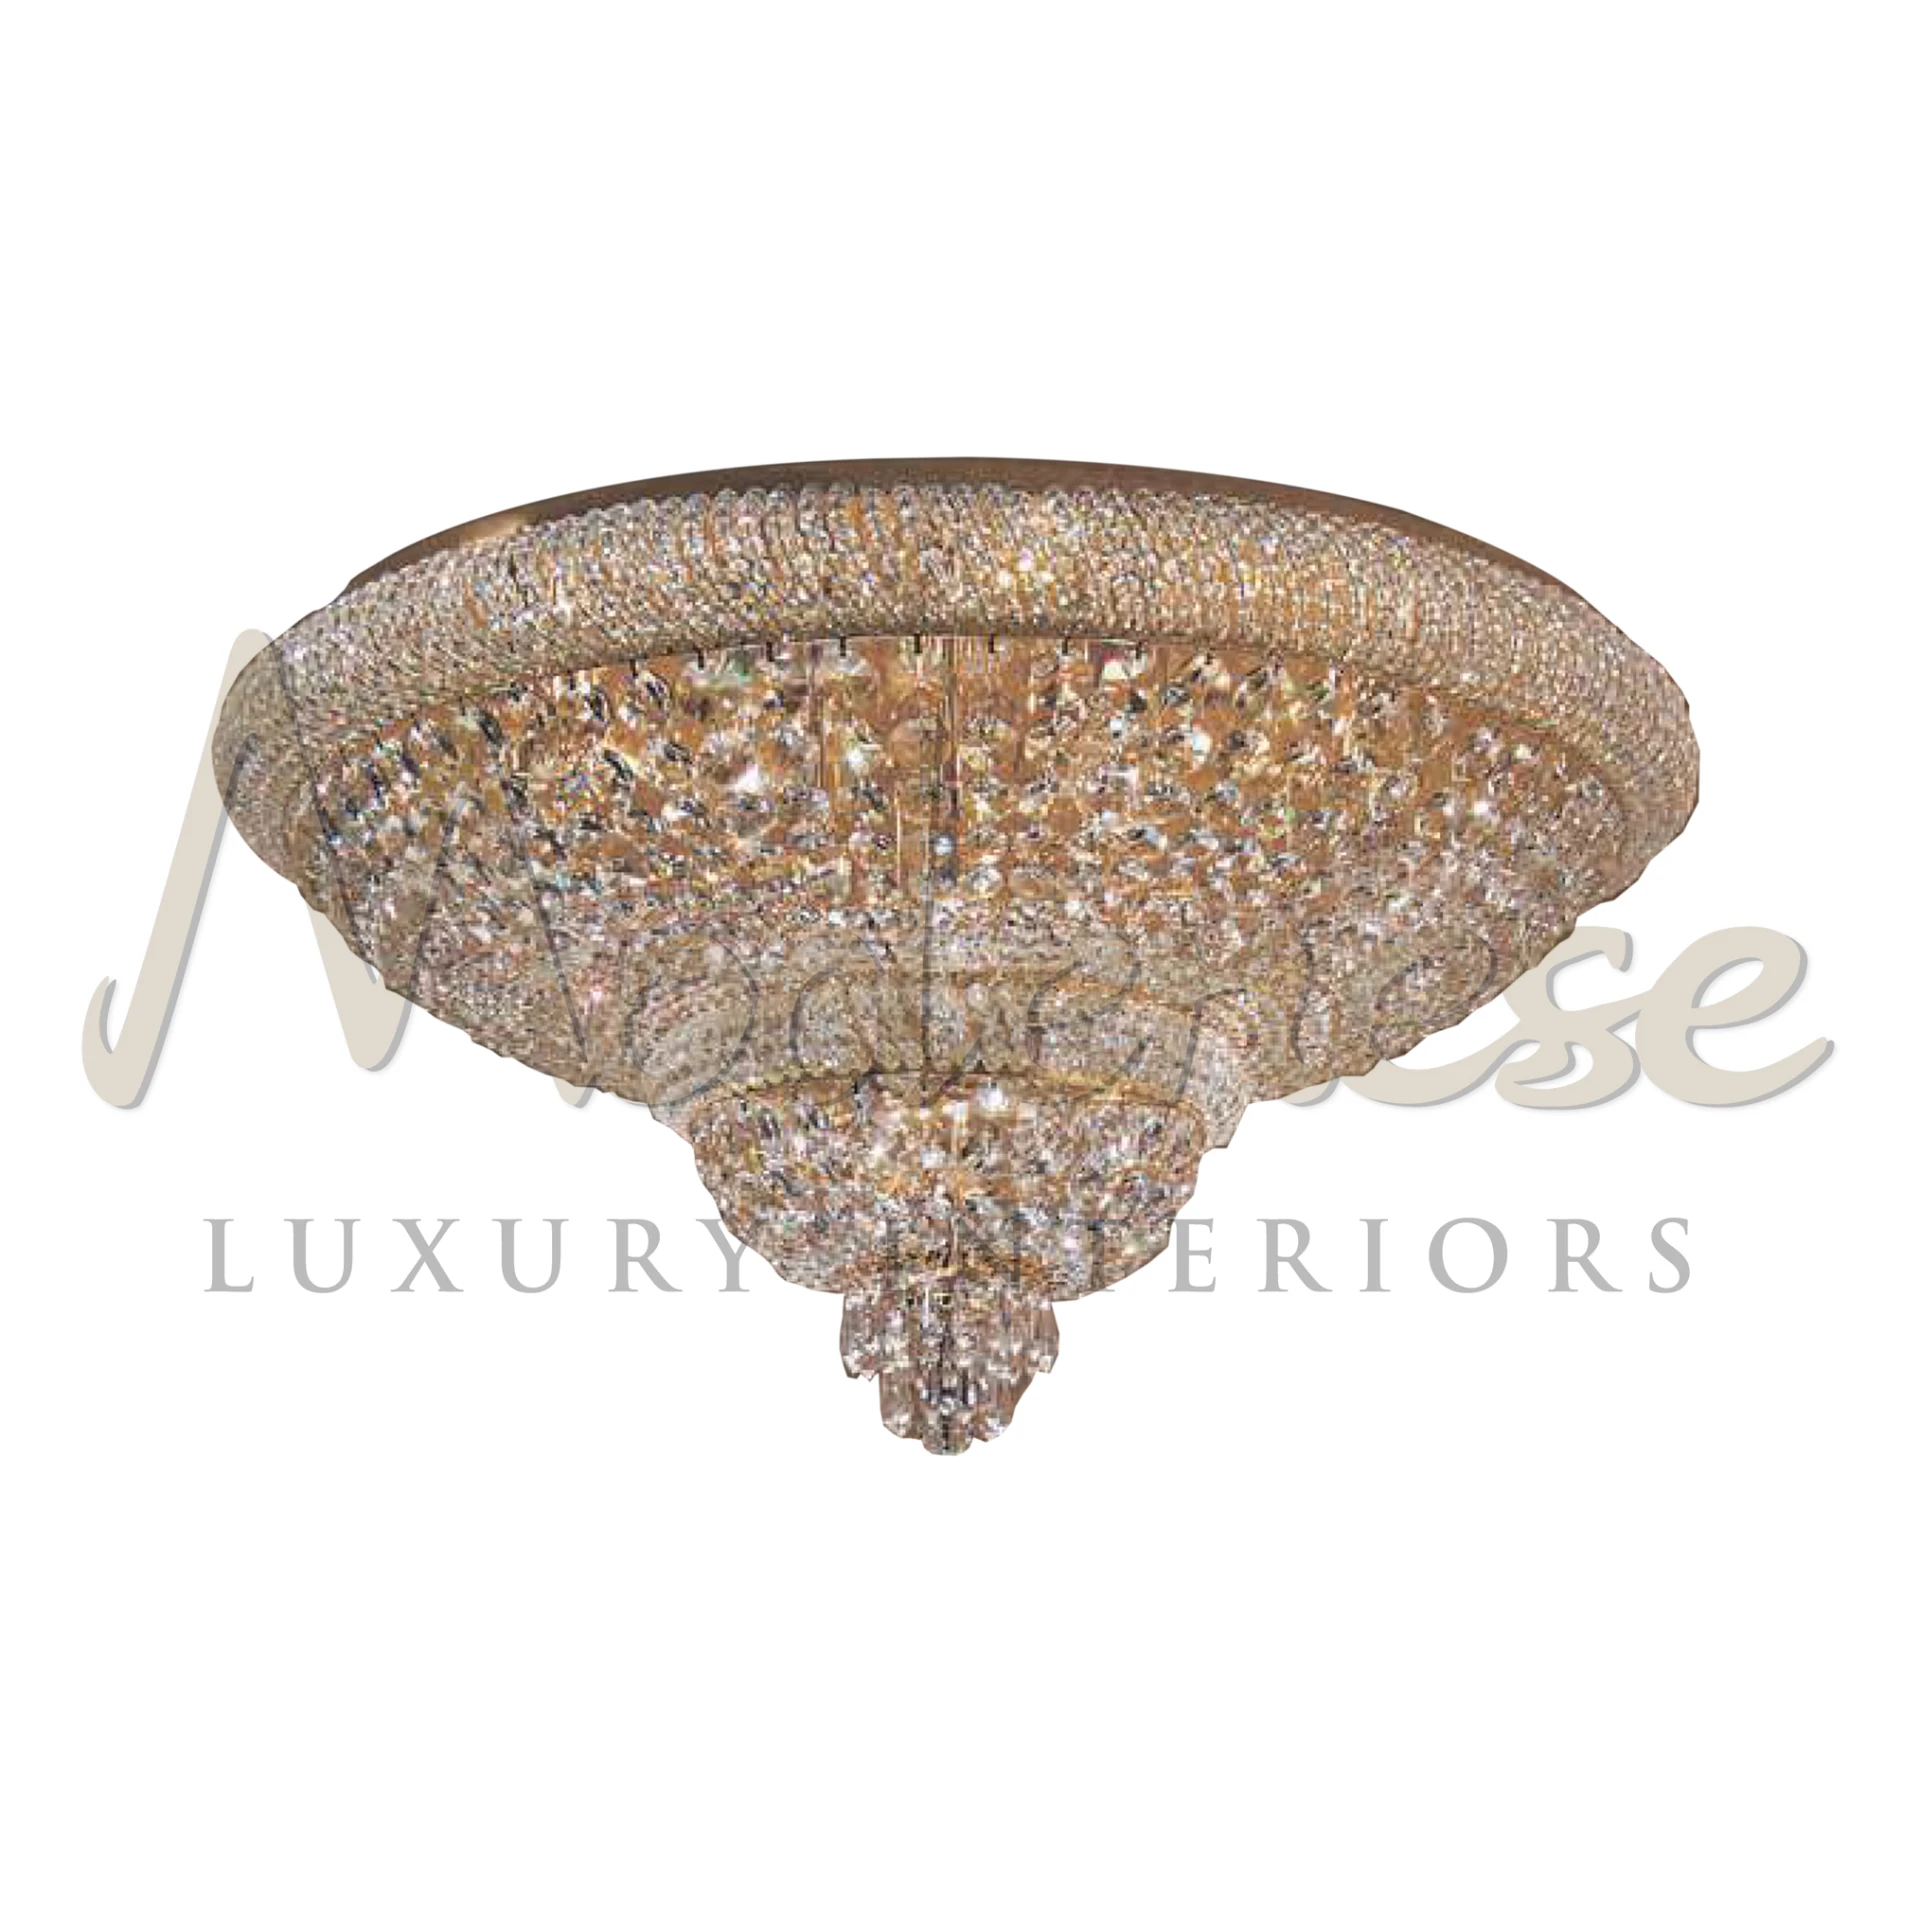 Luxury Gold Ceiling Lamp with sparkling scholer crystals and golden elegant design